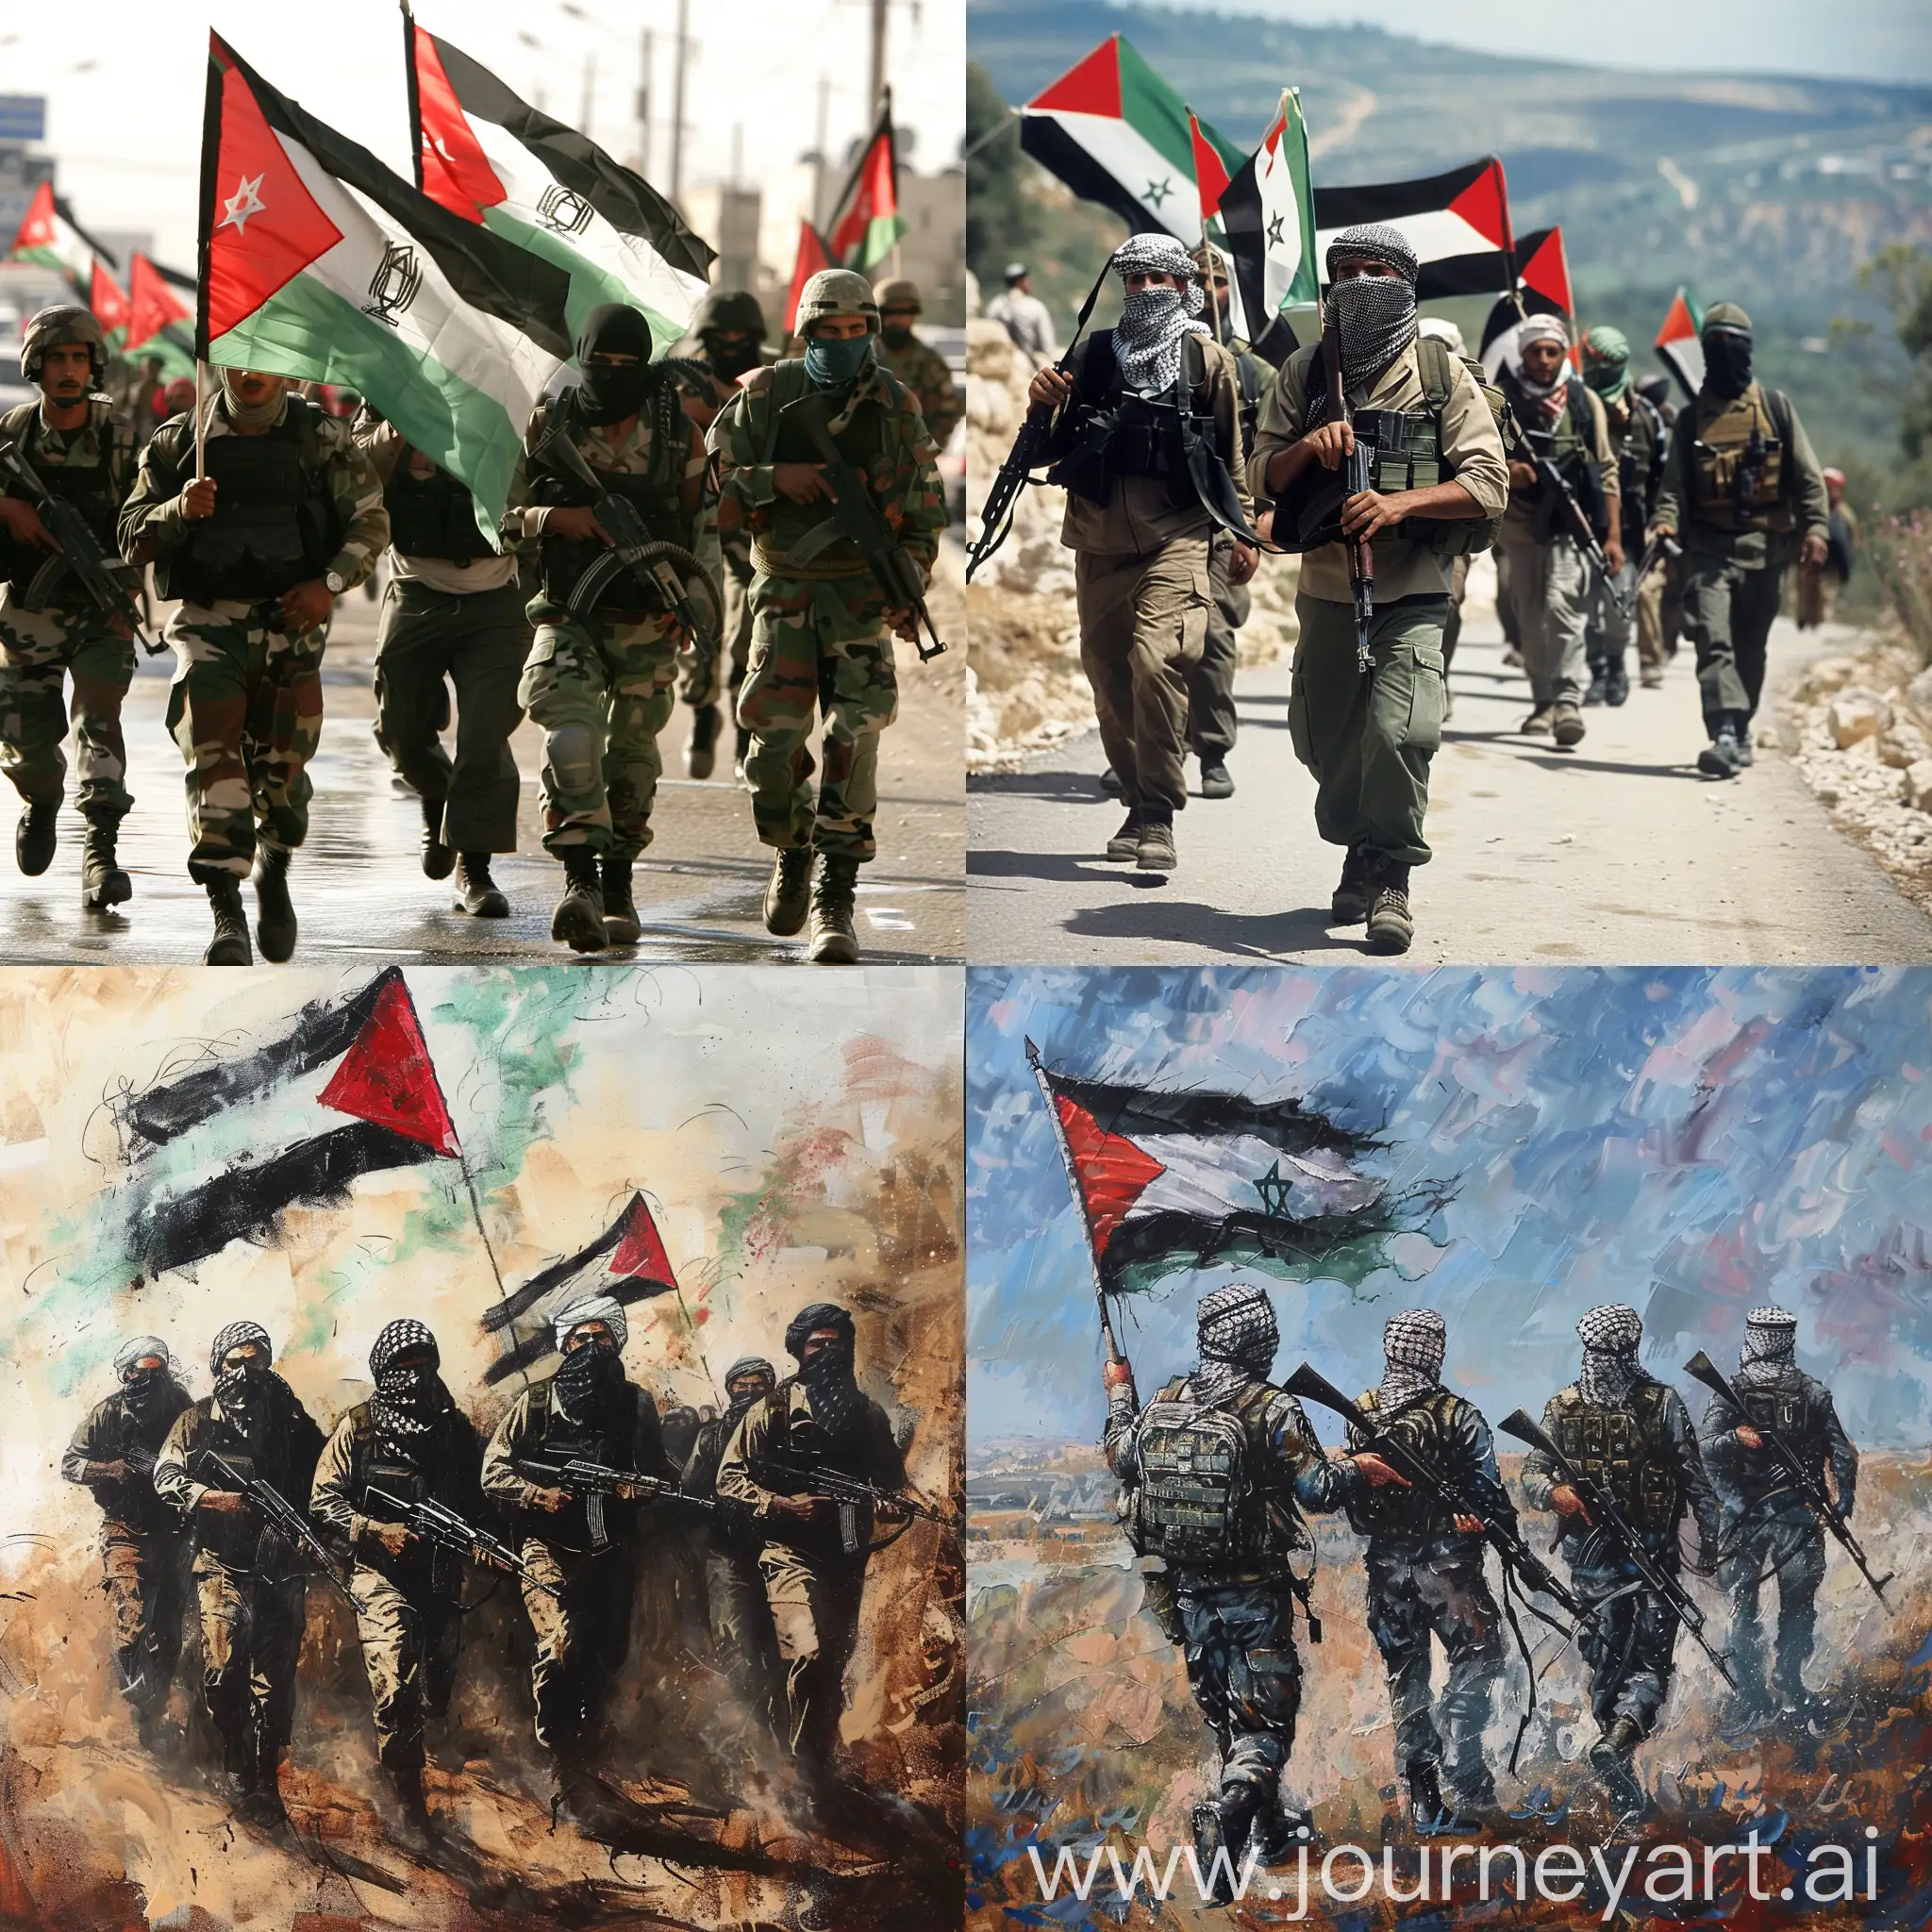 Palestine-Warriors-Unity-in-Defiance-Versatile-and-Resilient-Soldiers